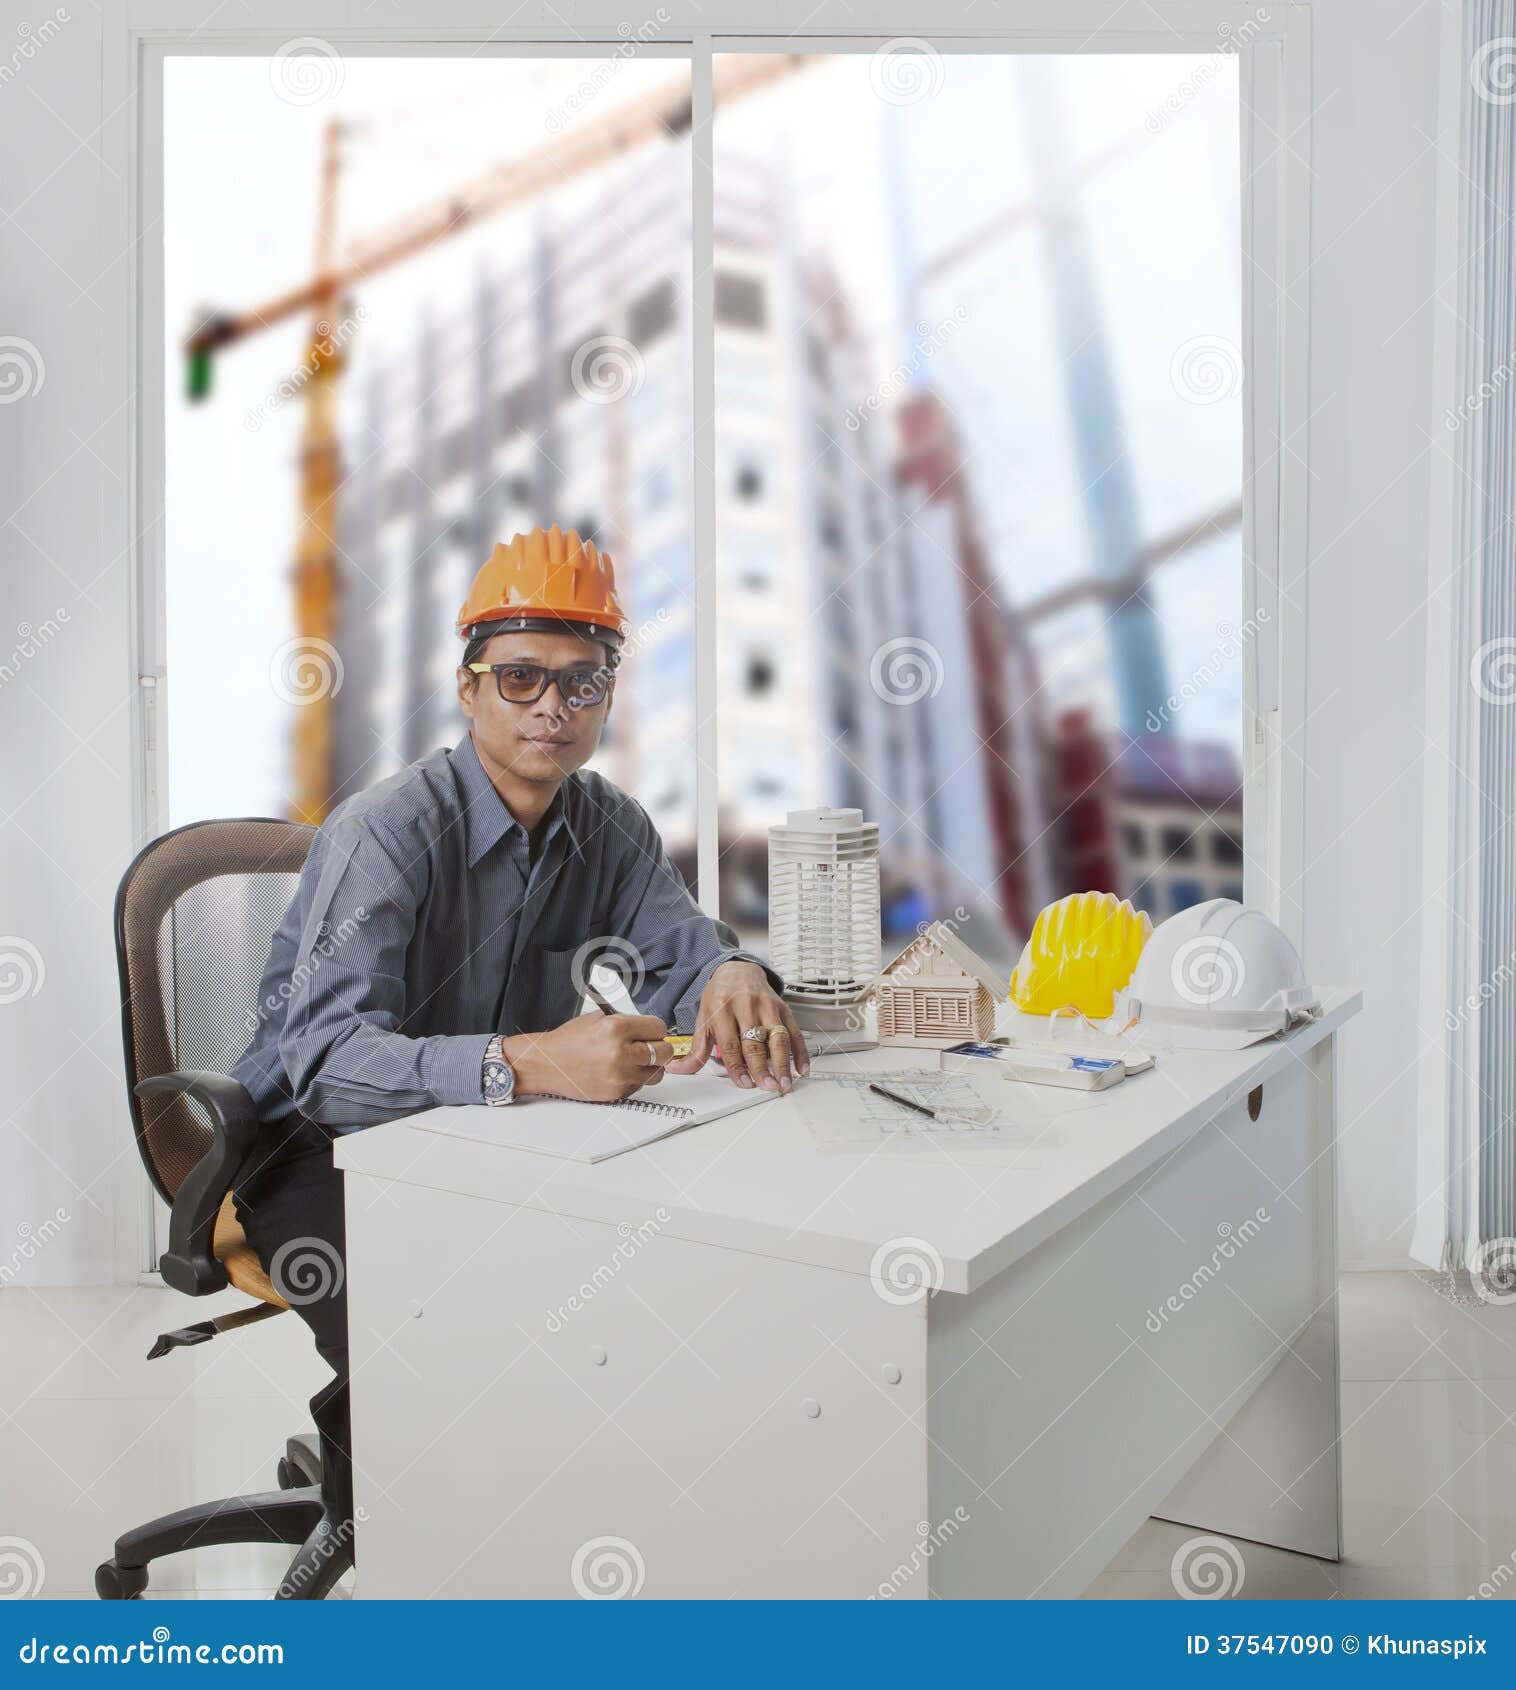 Architect Engineer Working in Office Room Against Building Construction  through Mirror Window Use for Architecture and Stock Photo - Image of  design, contractor: 37547090